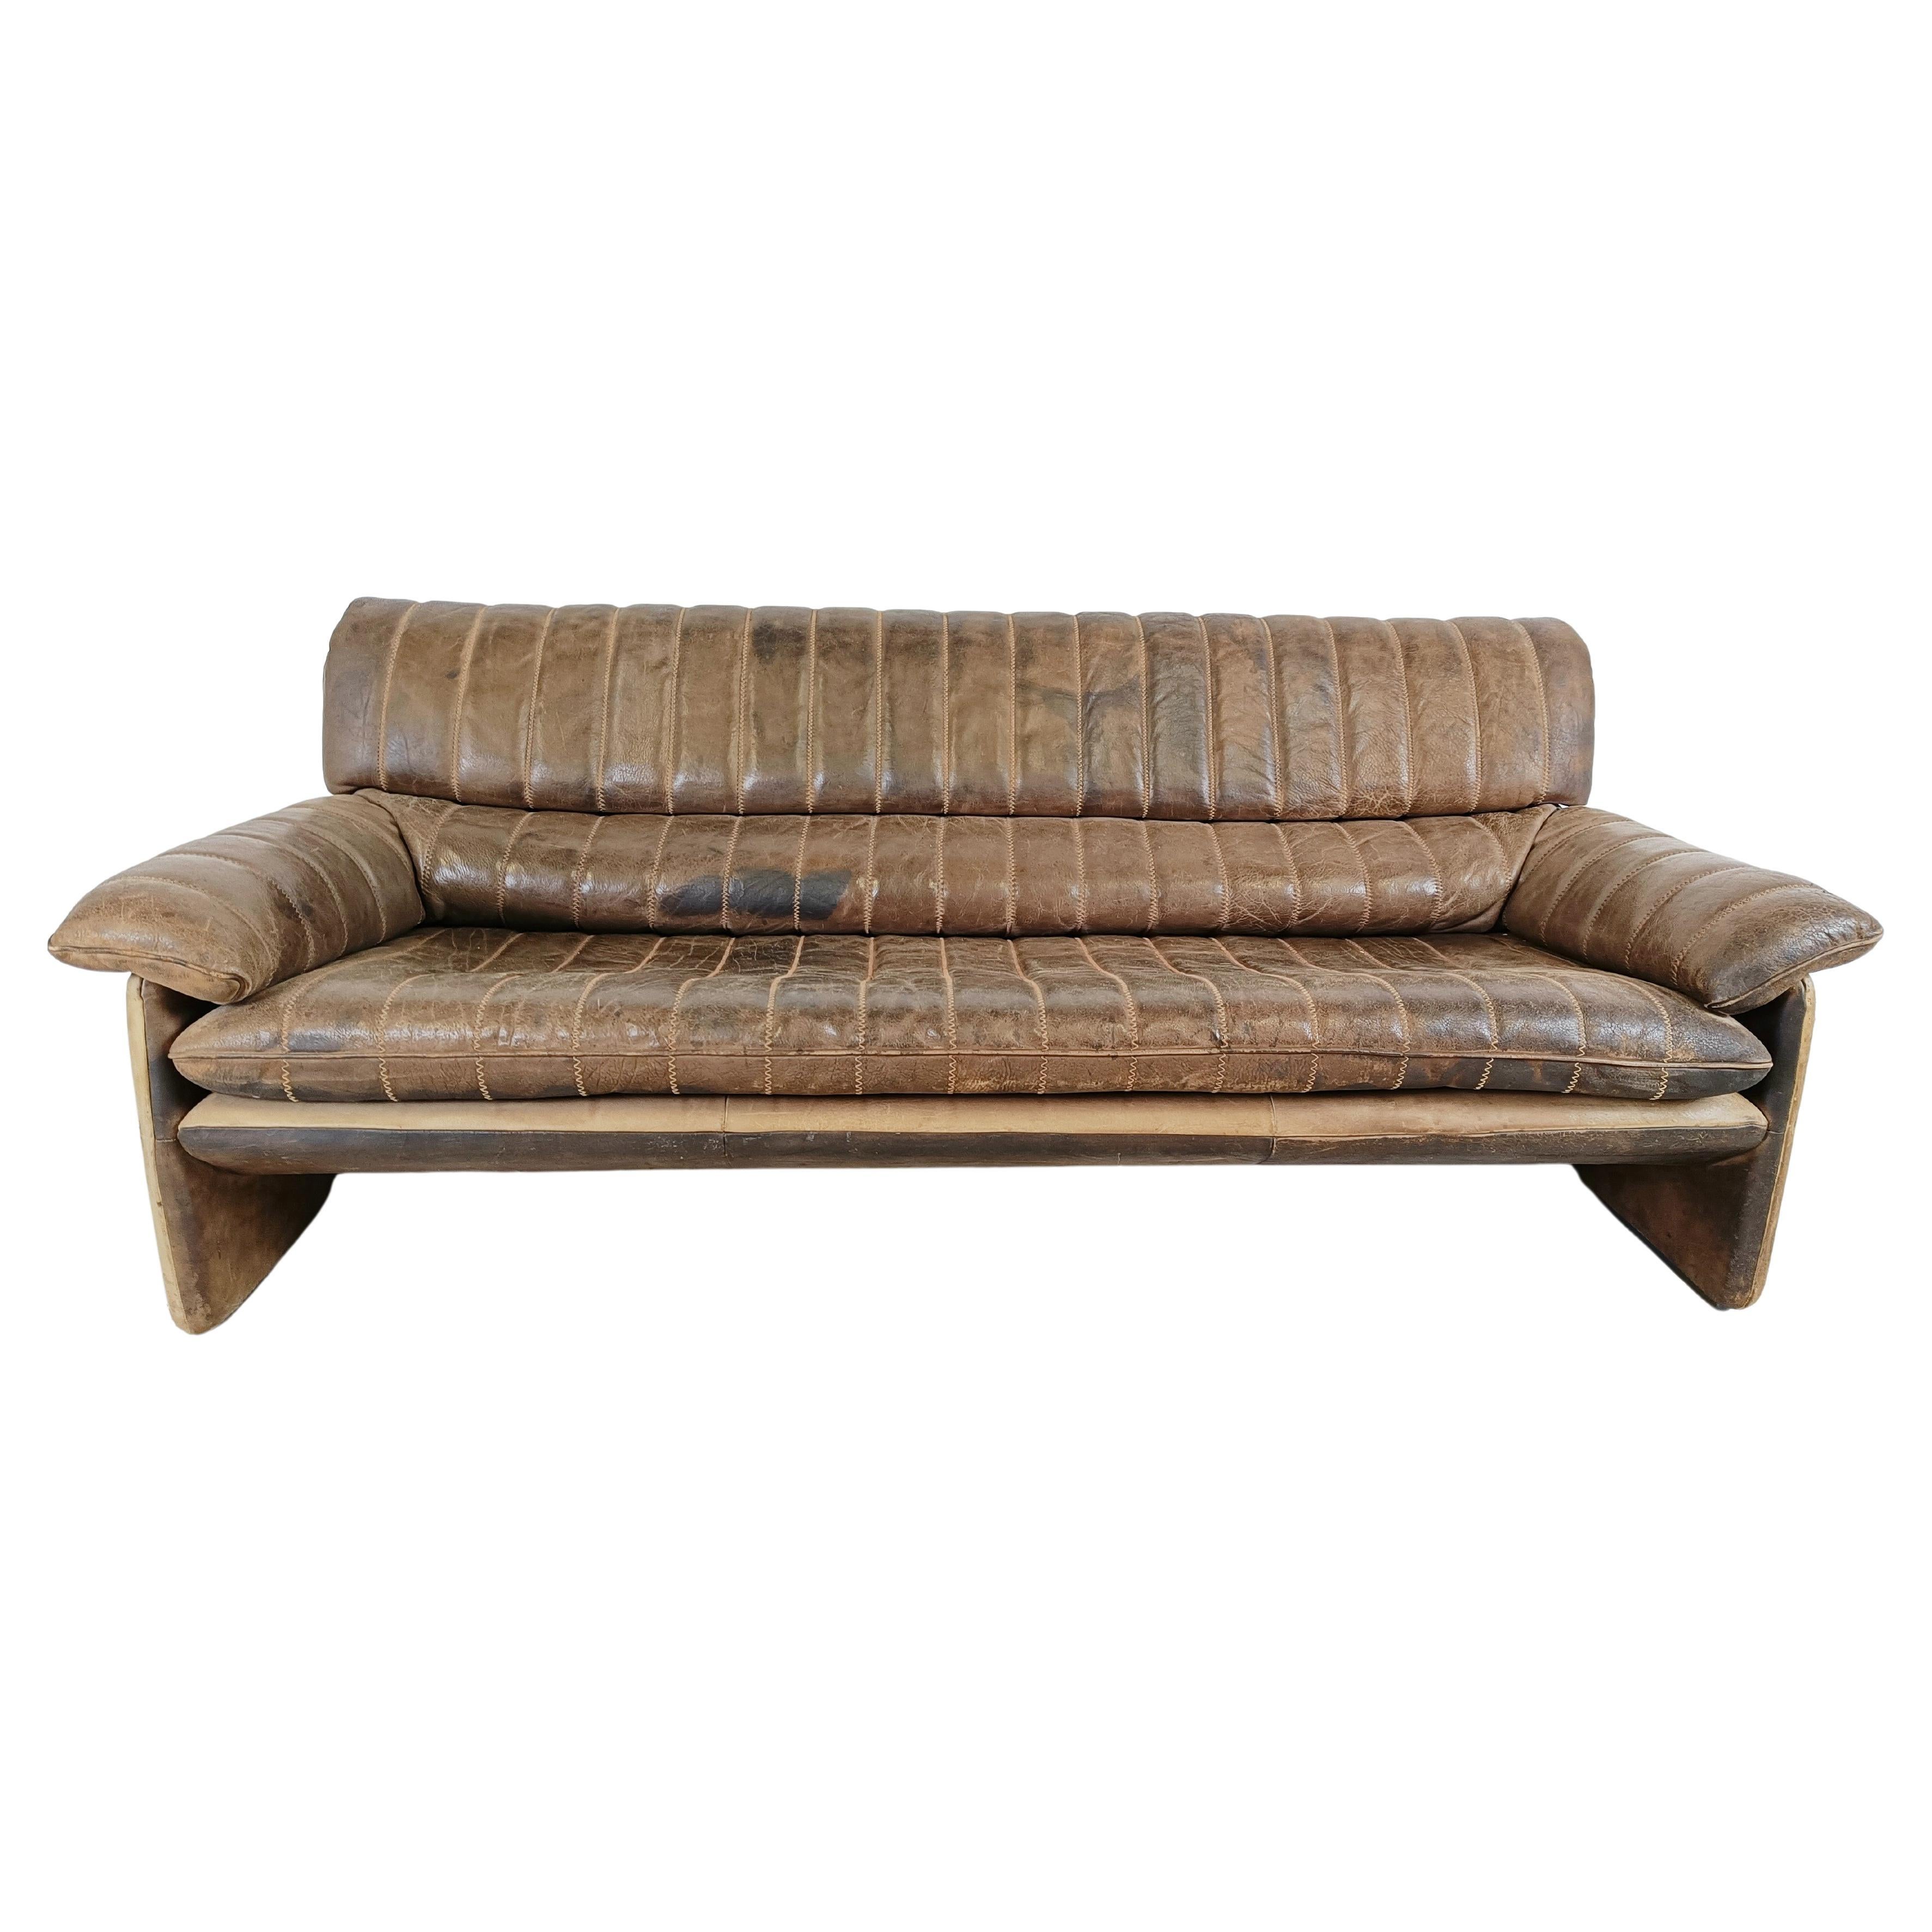 De Sede Ds86 Sofa in Brown Leather, 1970s For Sale